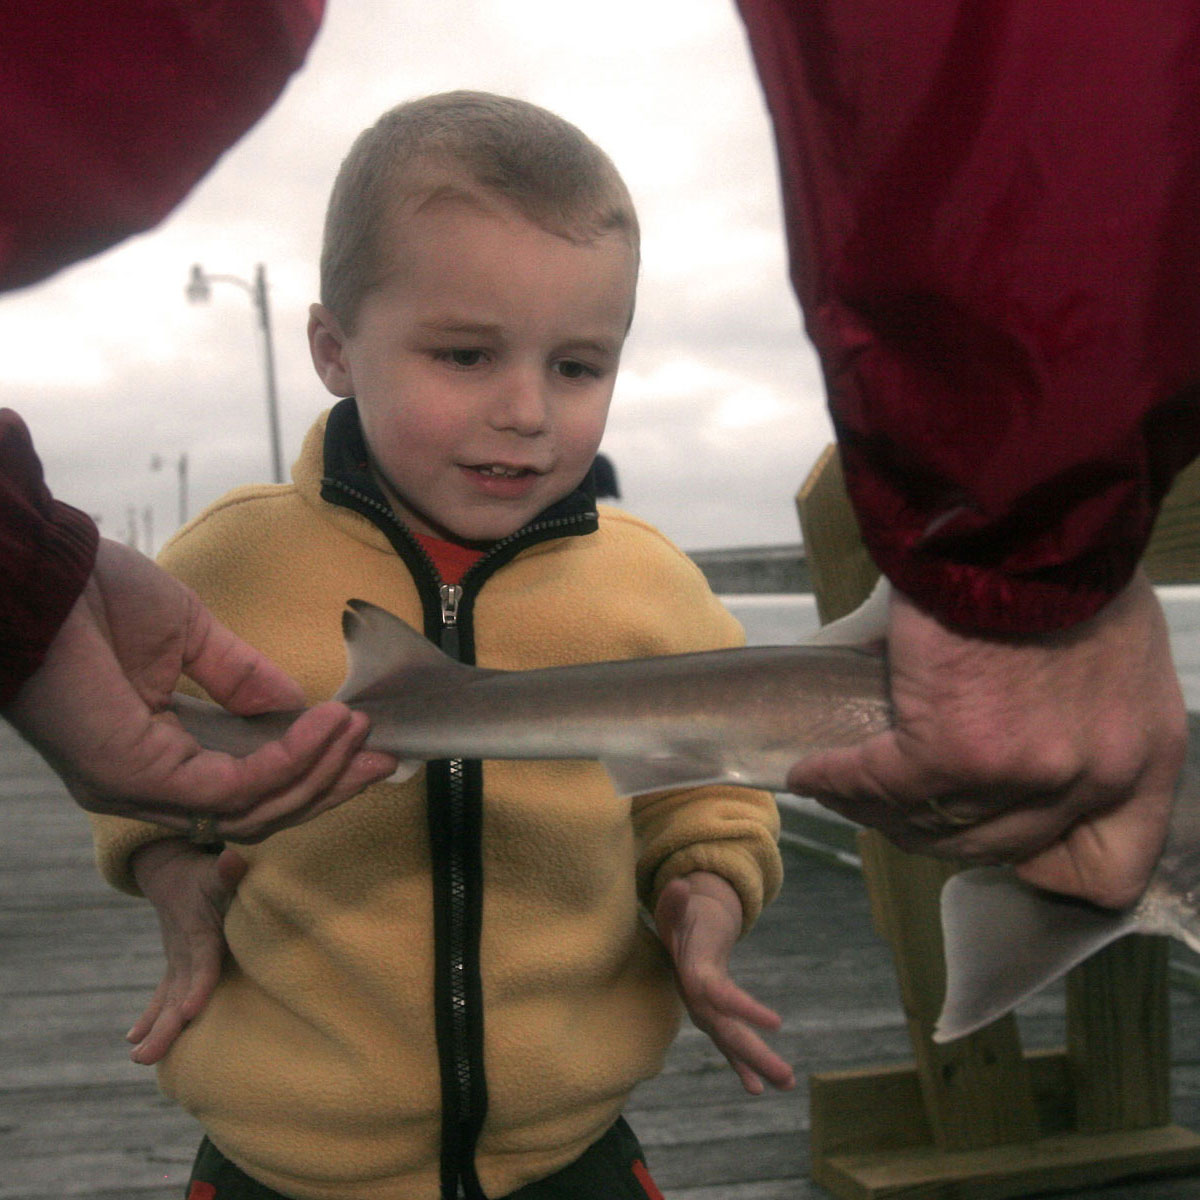 A small blond boy looks eagerly at a fish a man holds up